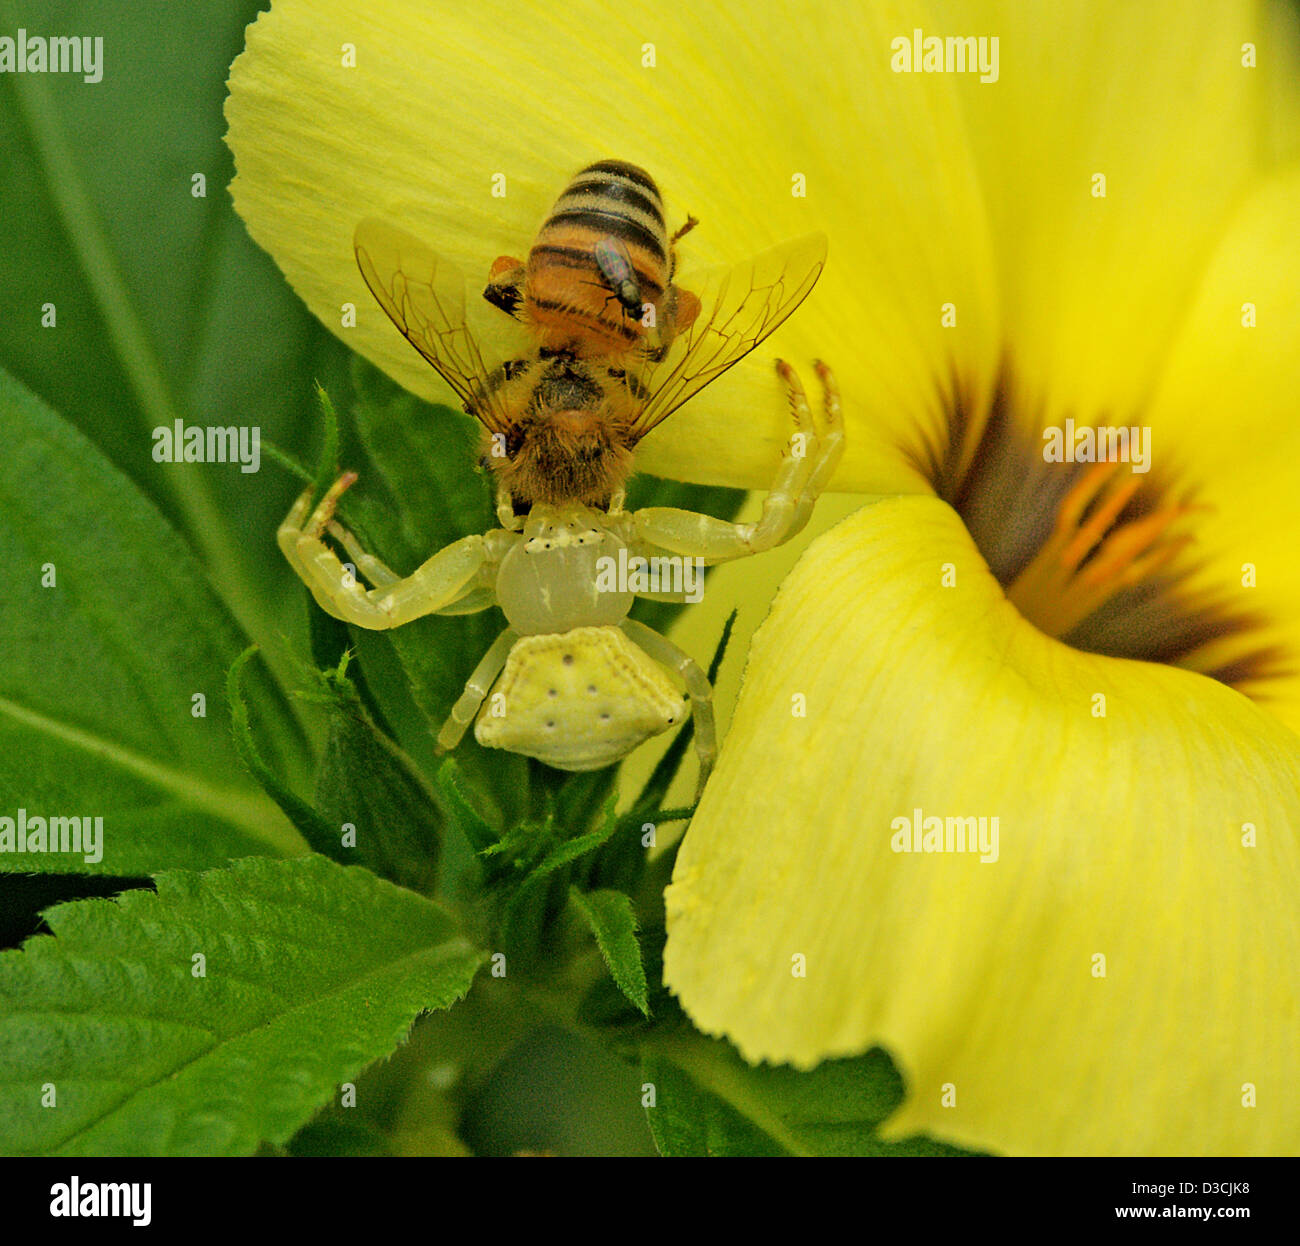 Yellow flower spider Thomisus spectabilis grasping its prey, a bee, on the bright yellow petals of a garden flower - Turnera elegans Stock Photo